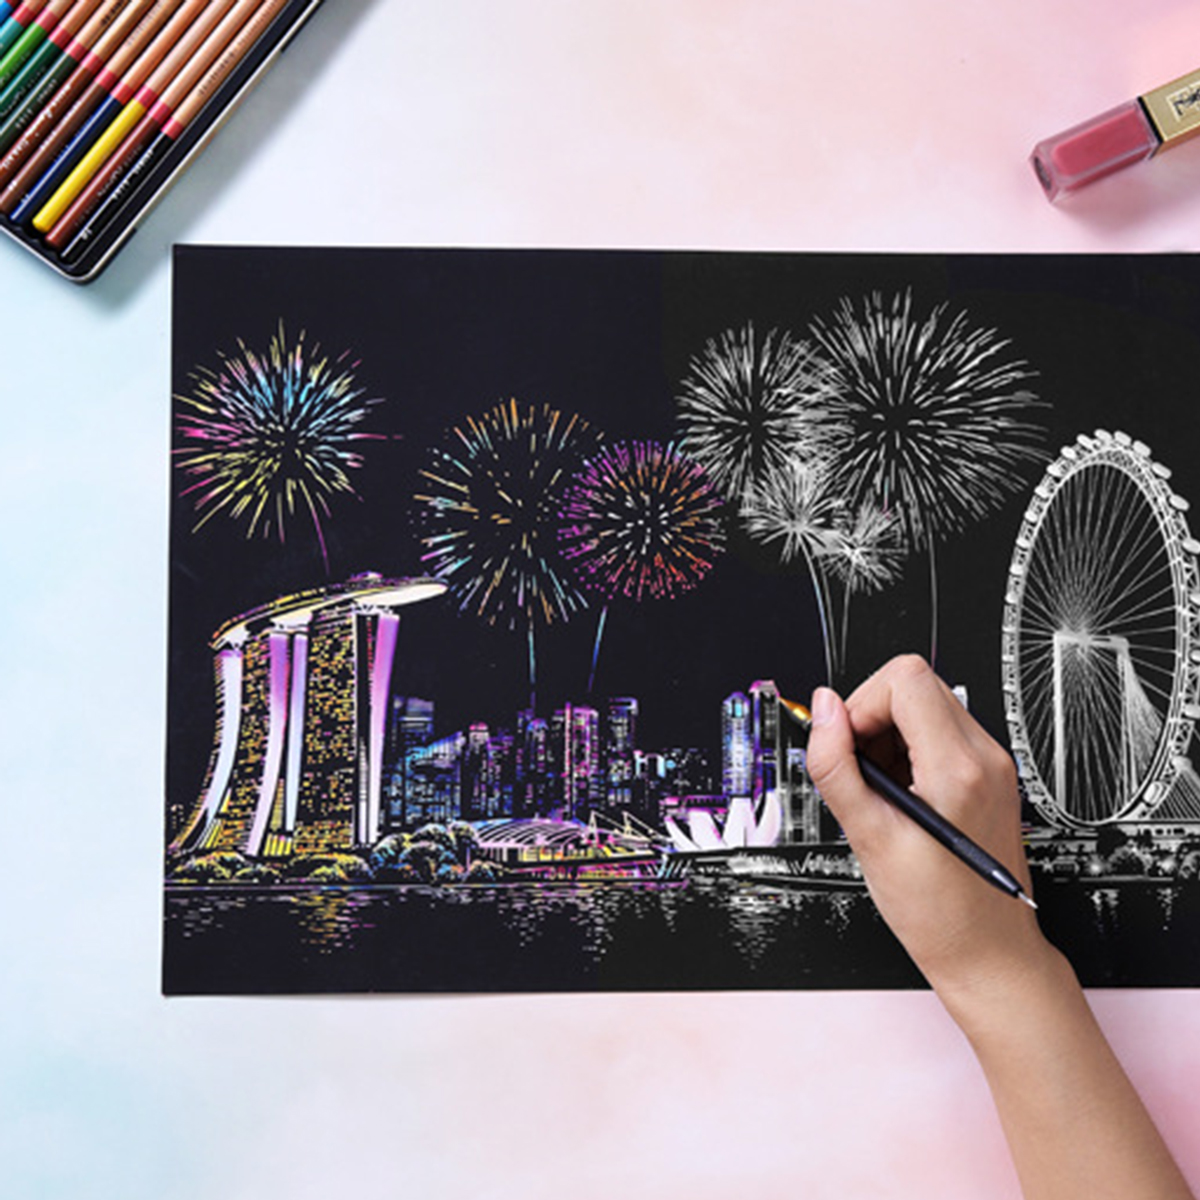 DIY-Scratch-Scraping-Painting-Drawing-Paper-World-Sightseeing-Pictures-Creative-Gift-Home-Decor-DIY--1634916-4